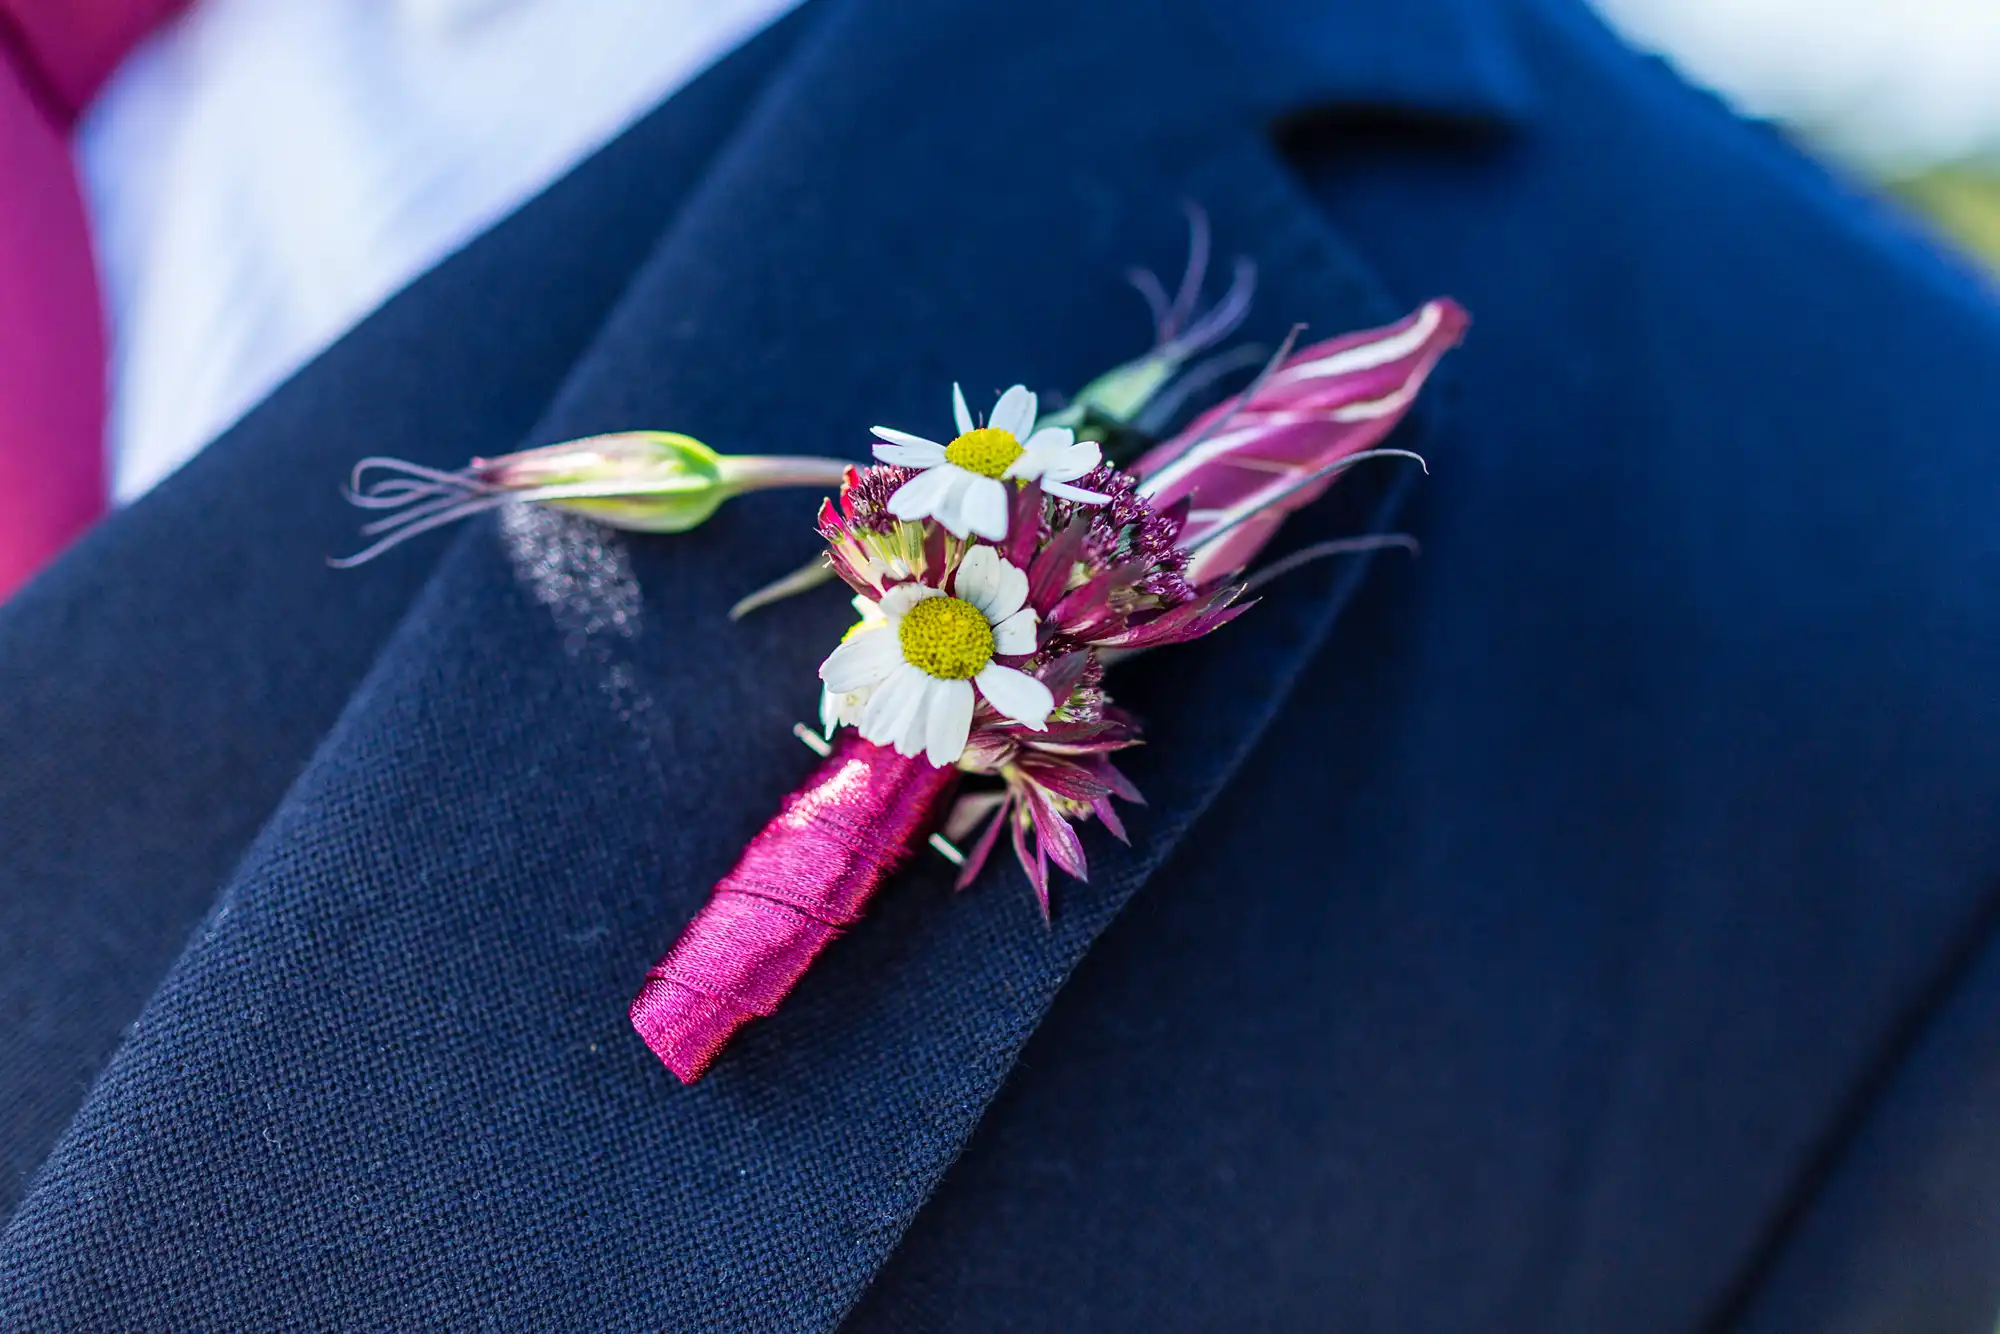 A close-up of a boutonniere with daisies and pink accents on a navy blue suit jacket.